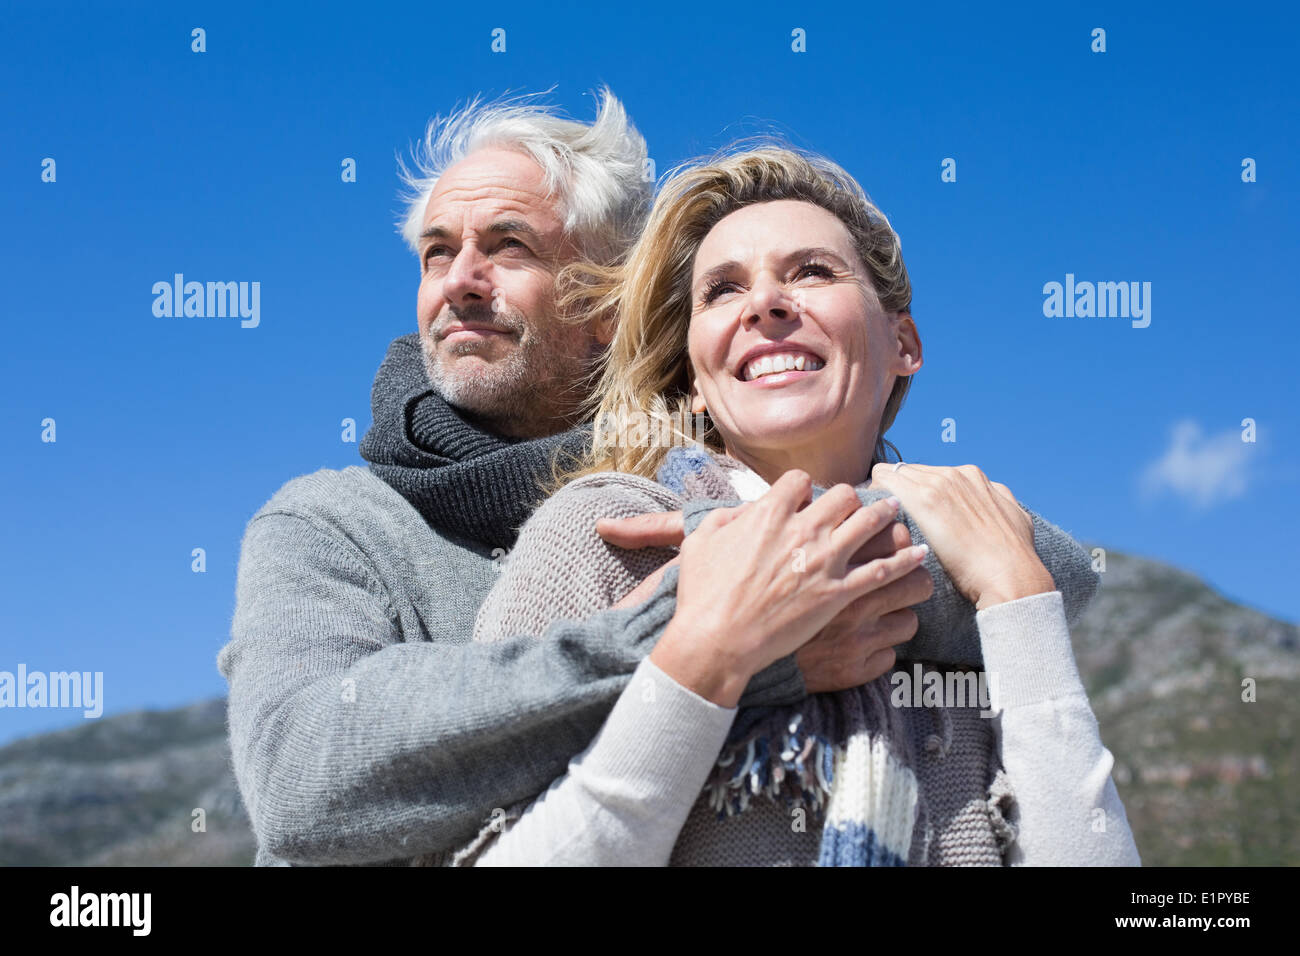 Carefree couple hugging in warm clothing Stock Photo